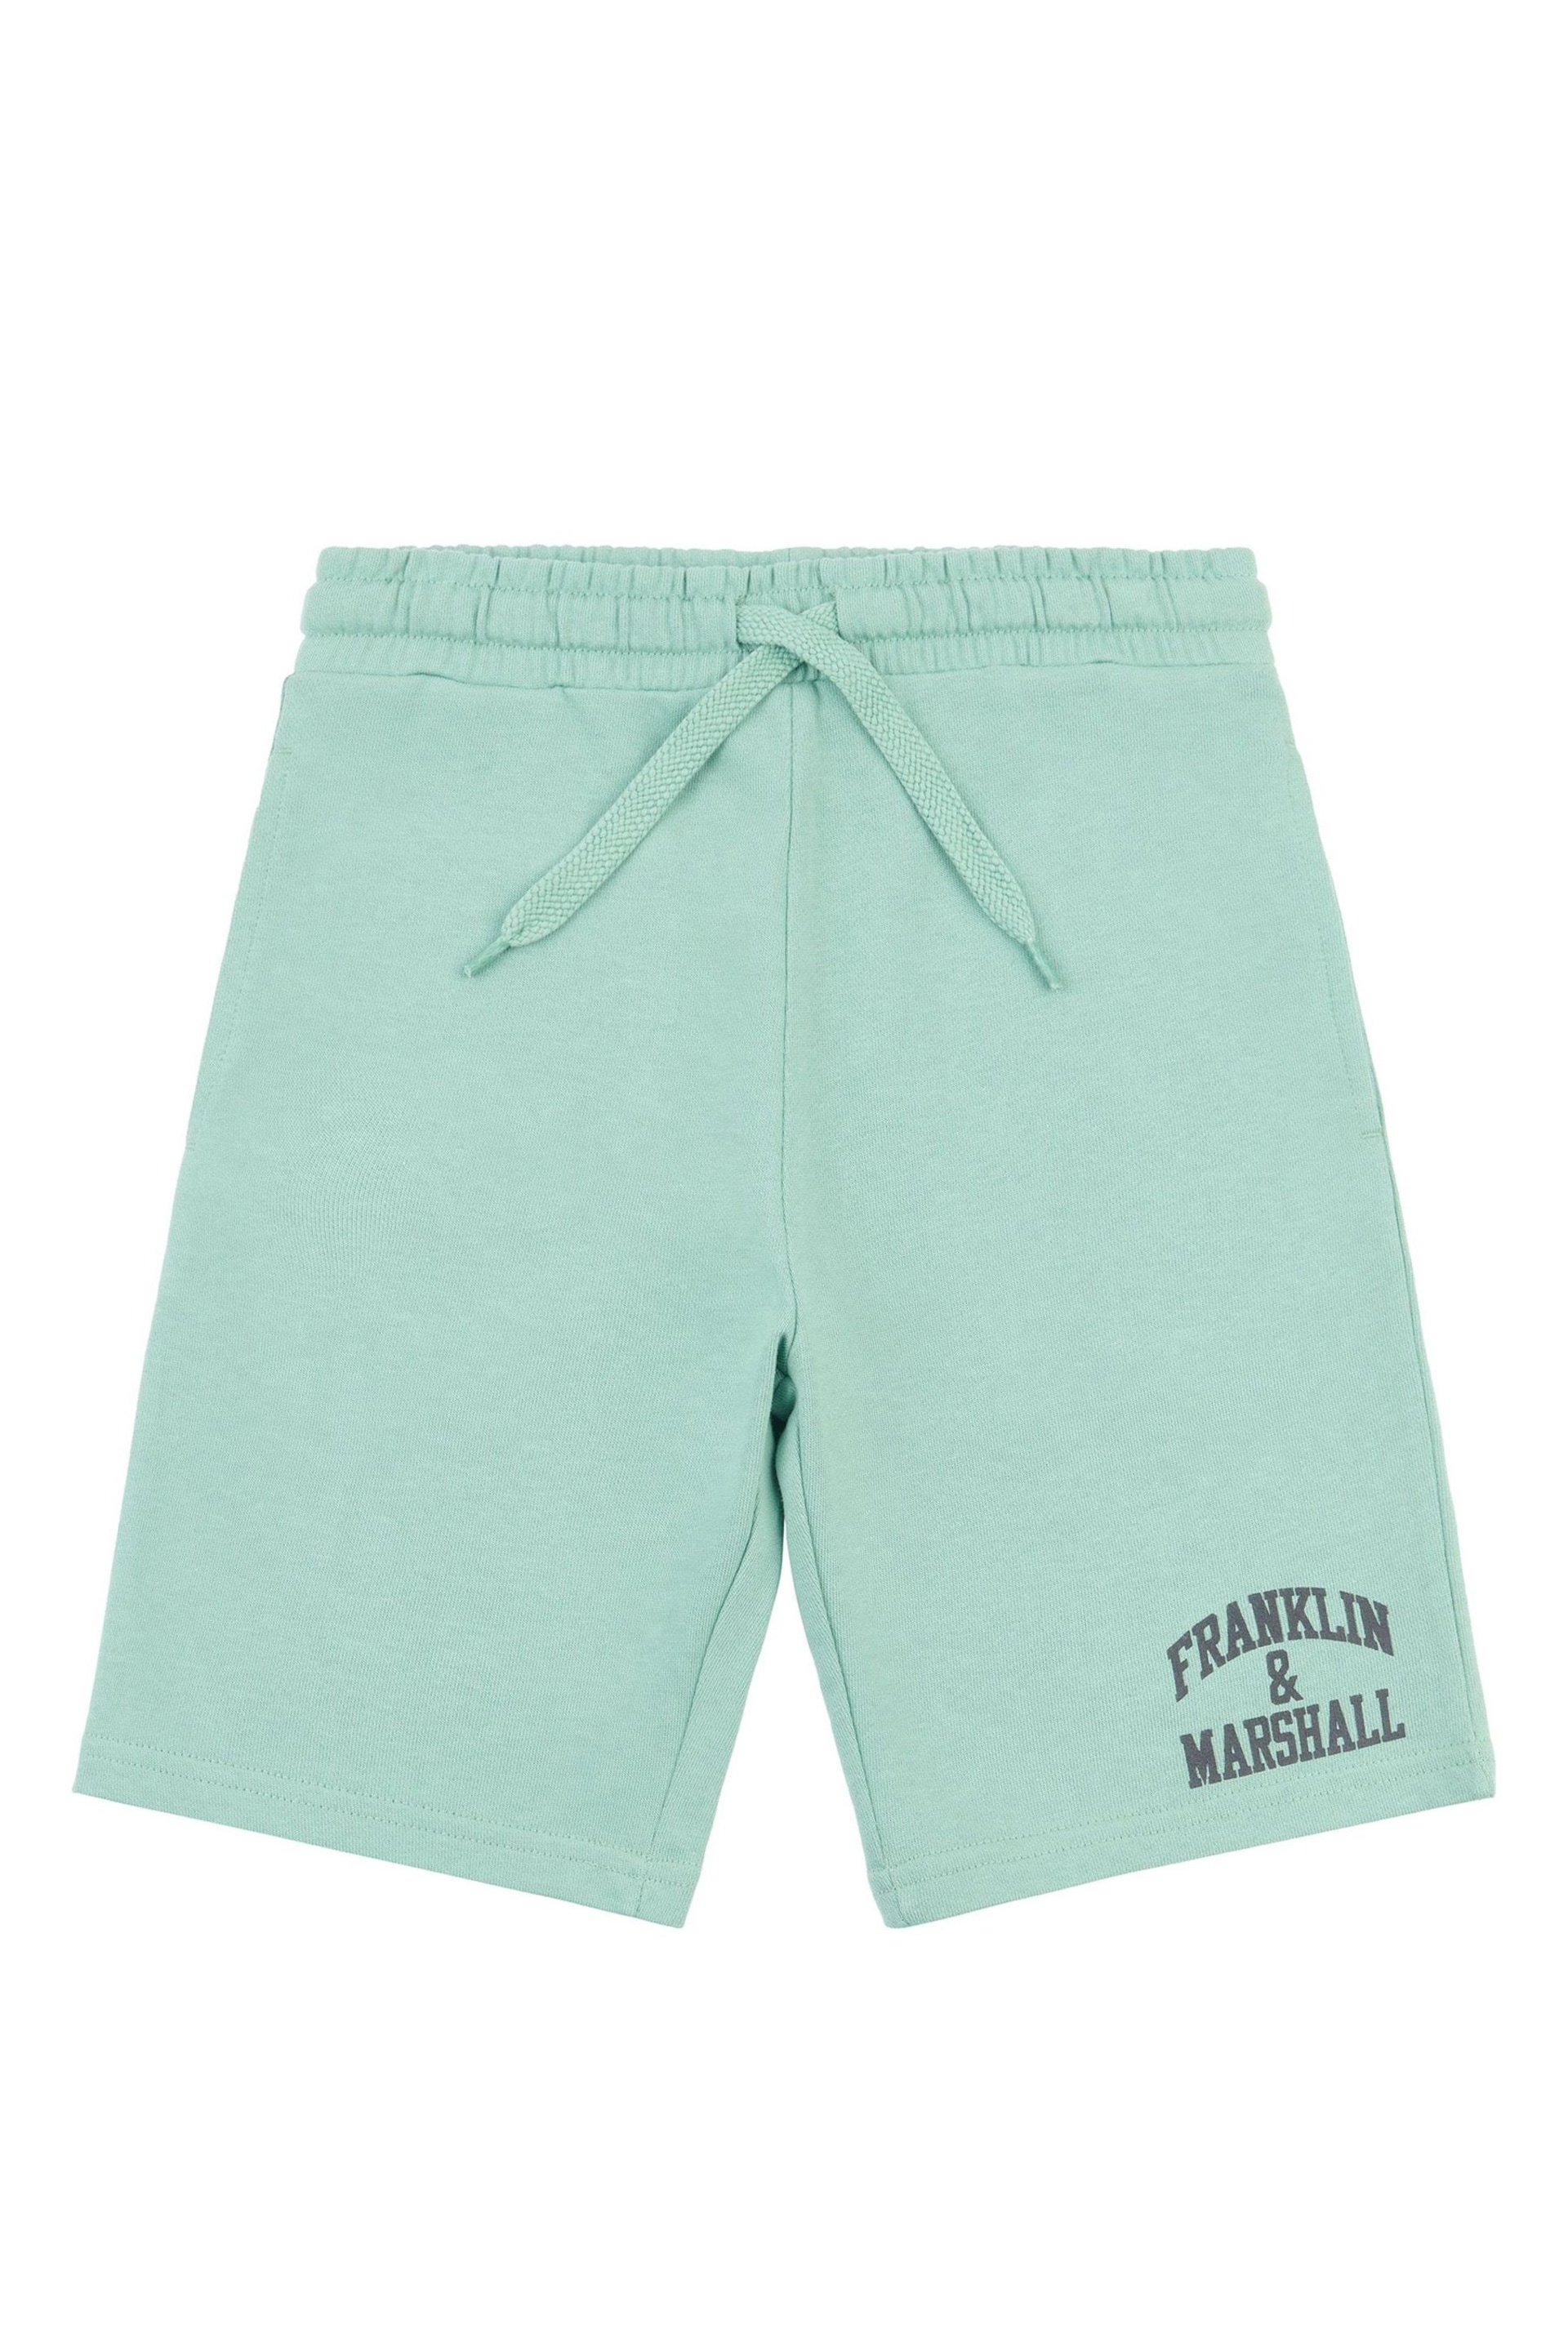 Franklin & Marshall Greean Arch Letter Shorts - Image 1 of 3